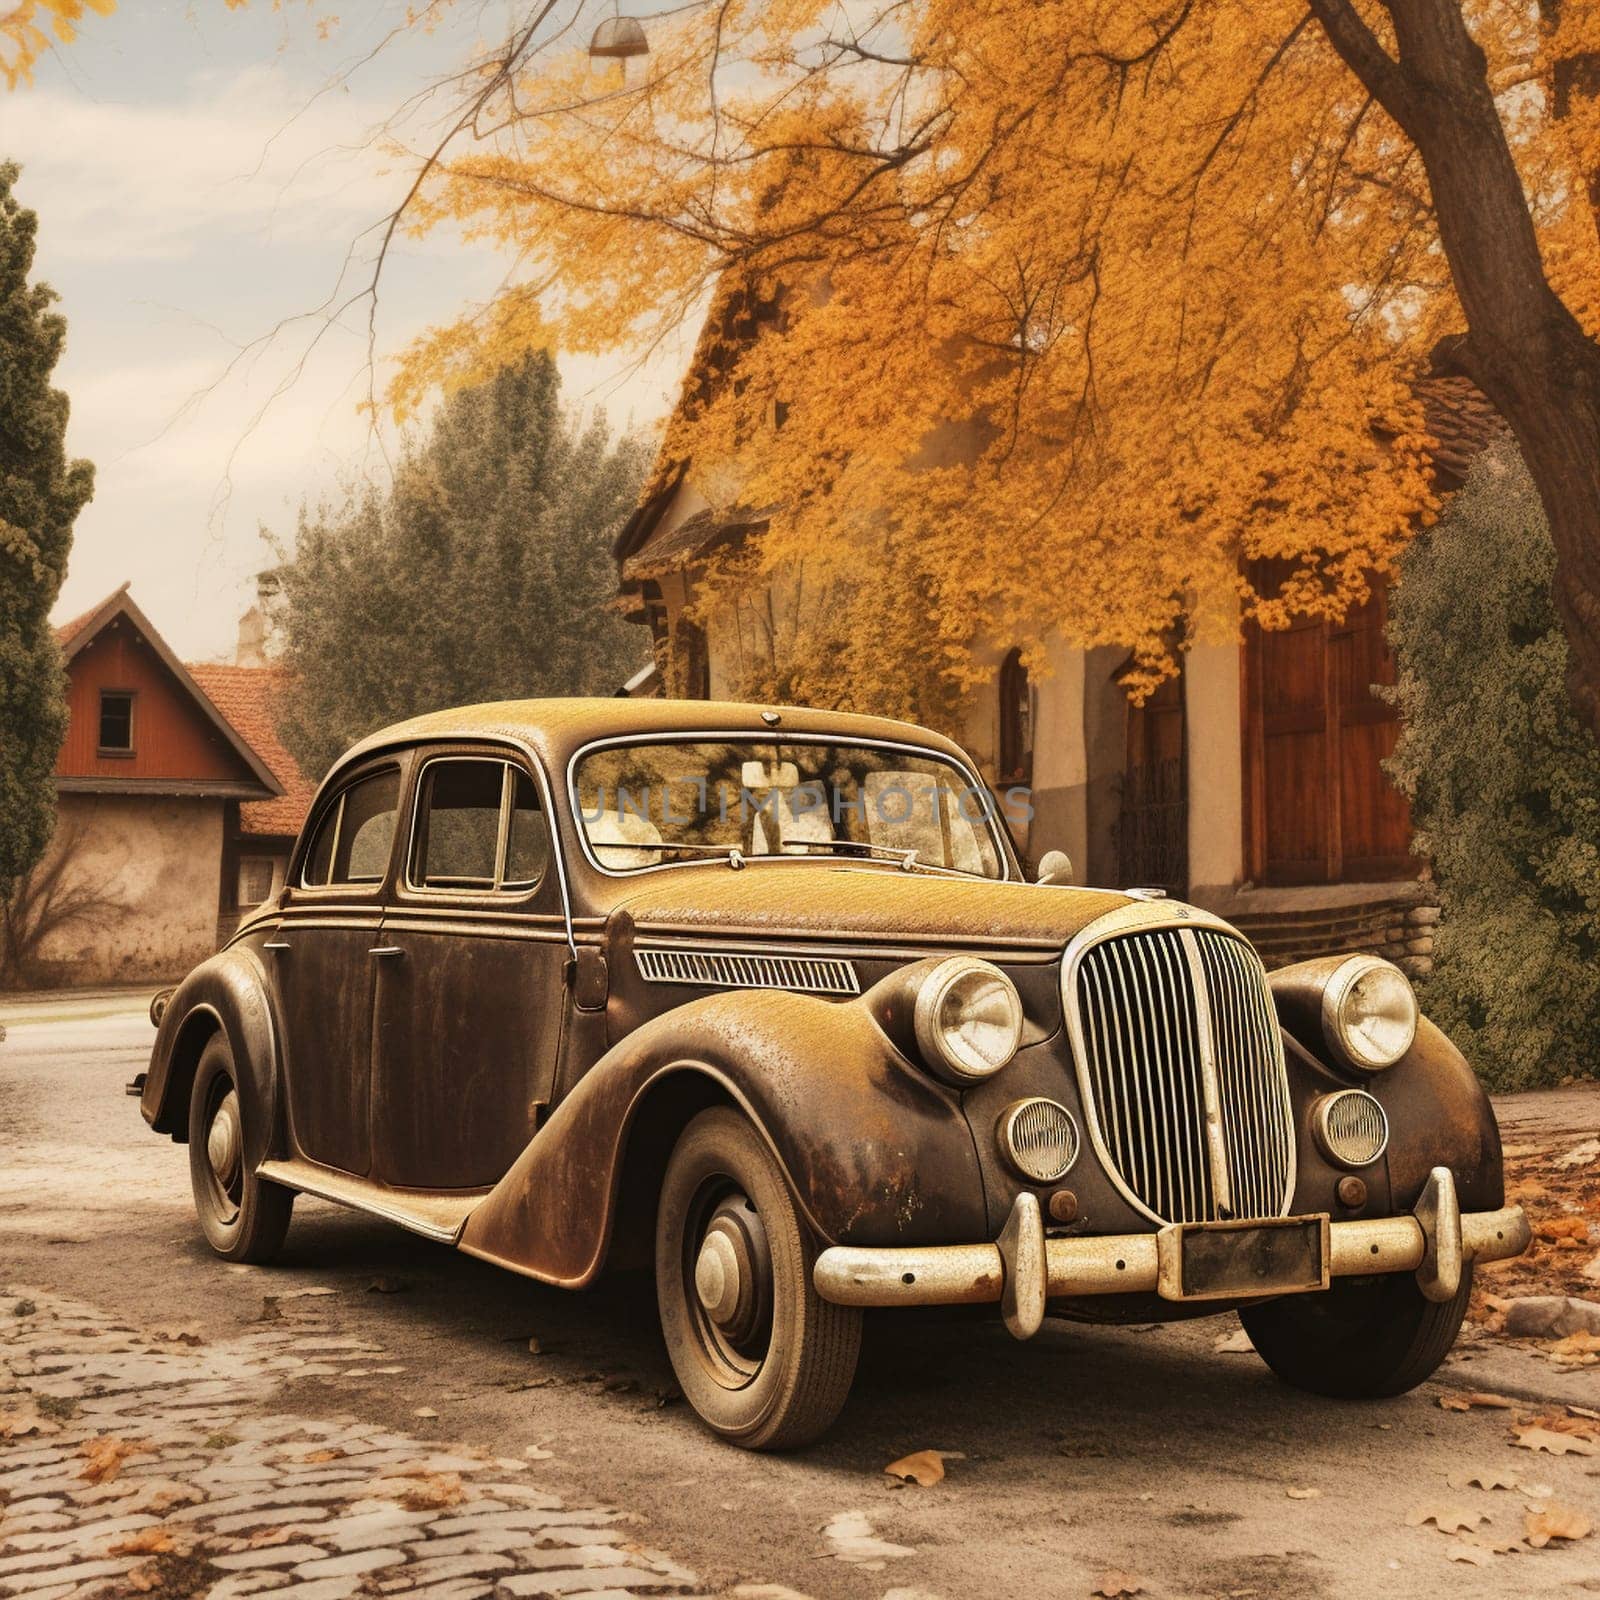 Vintage car in nostalgic art style against scenic backdrop by Sahin